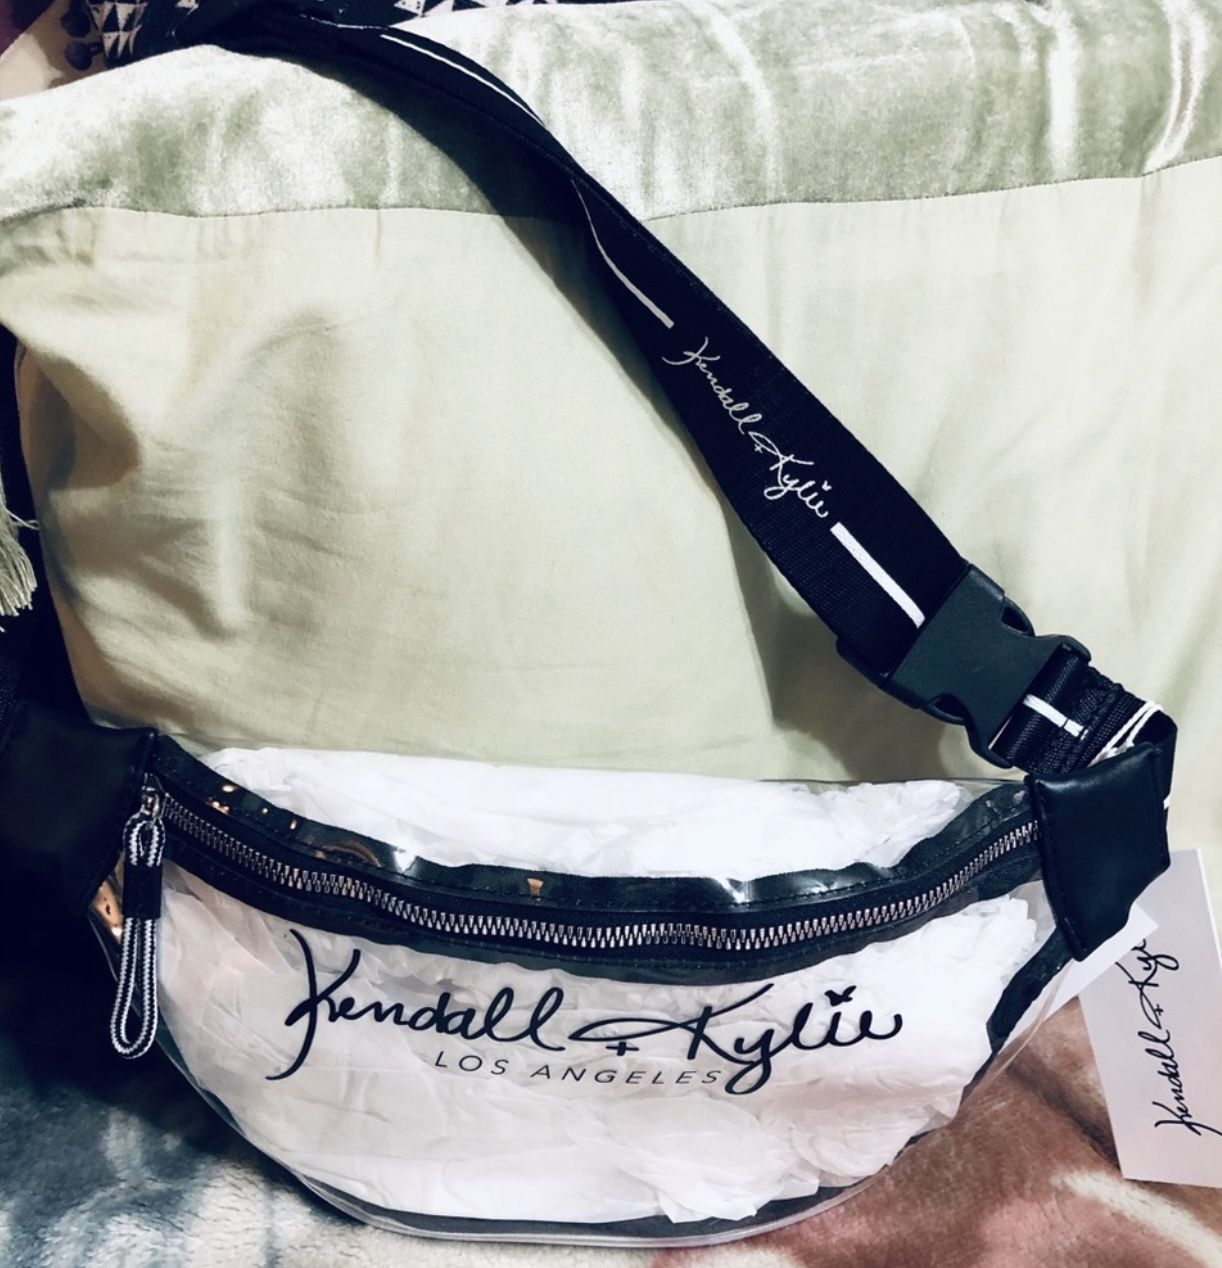 Genuine Kendall & Kylie Clear Waist Bag (Brand New With Tags) 